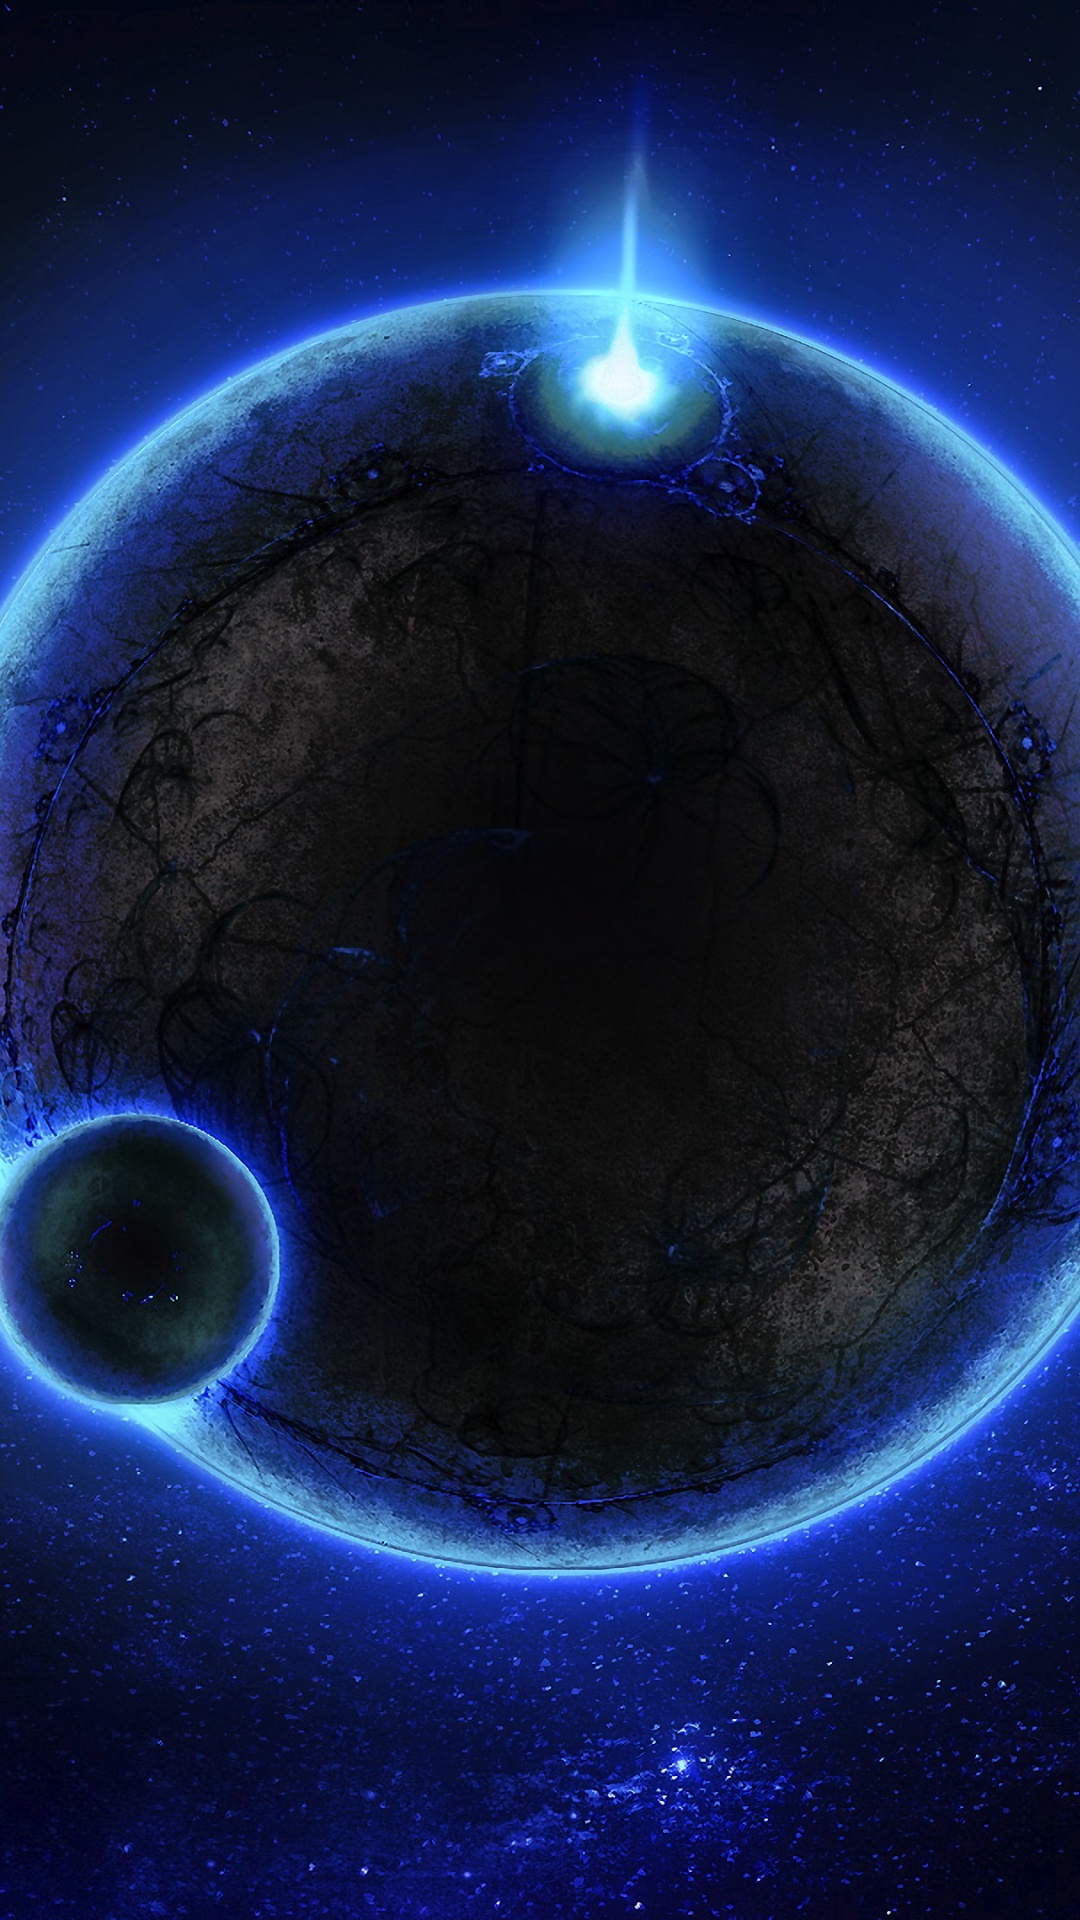 Blue and White Planet With Light. Wallpaper in 1080x1920 Resolution